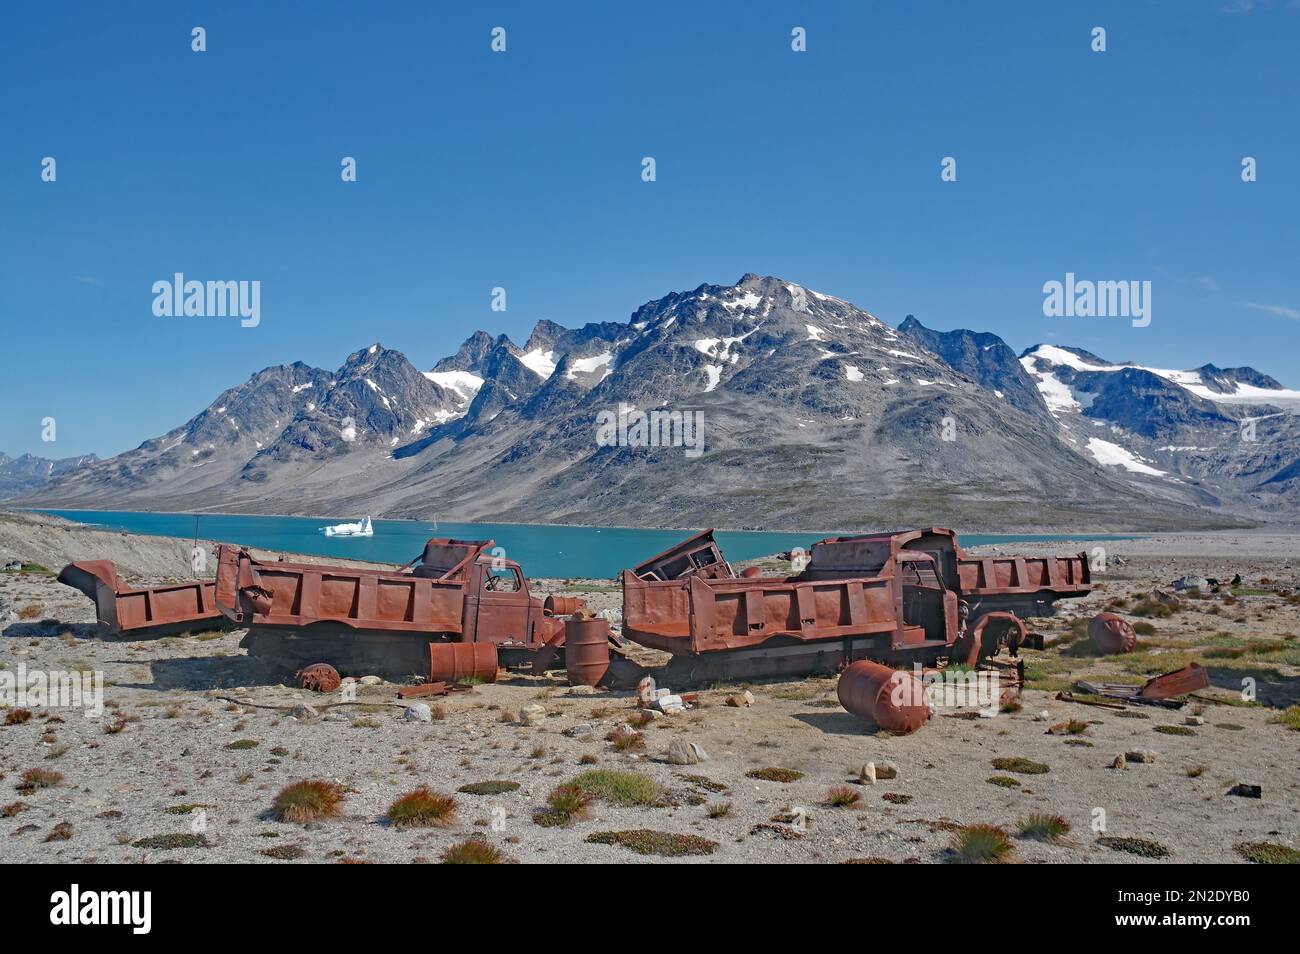 Rusty army trucks from 1947, barren mountains, Ikateq 2, army base, East Greenland, Arctic, Greenland, North America, Denmark Stock Photo